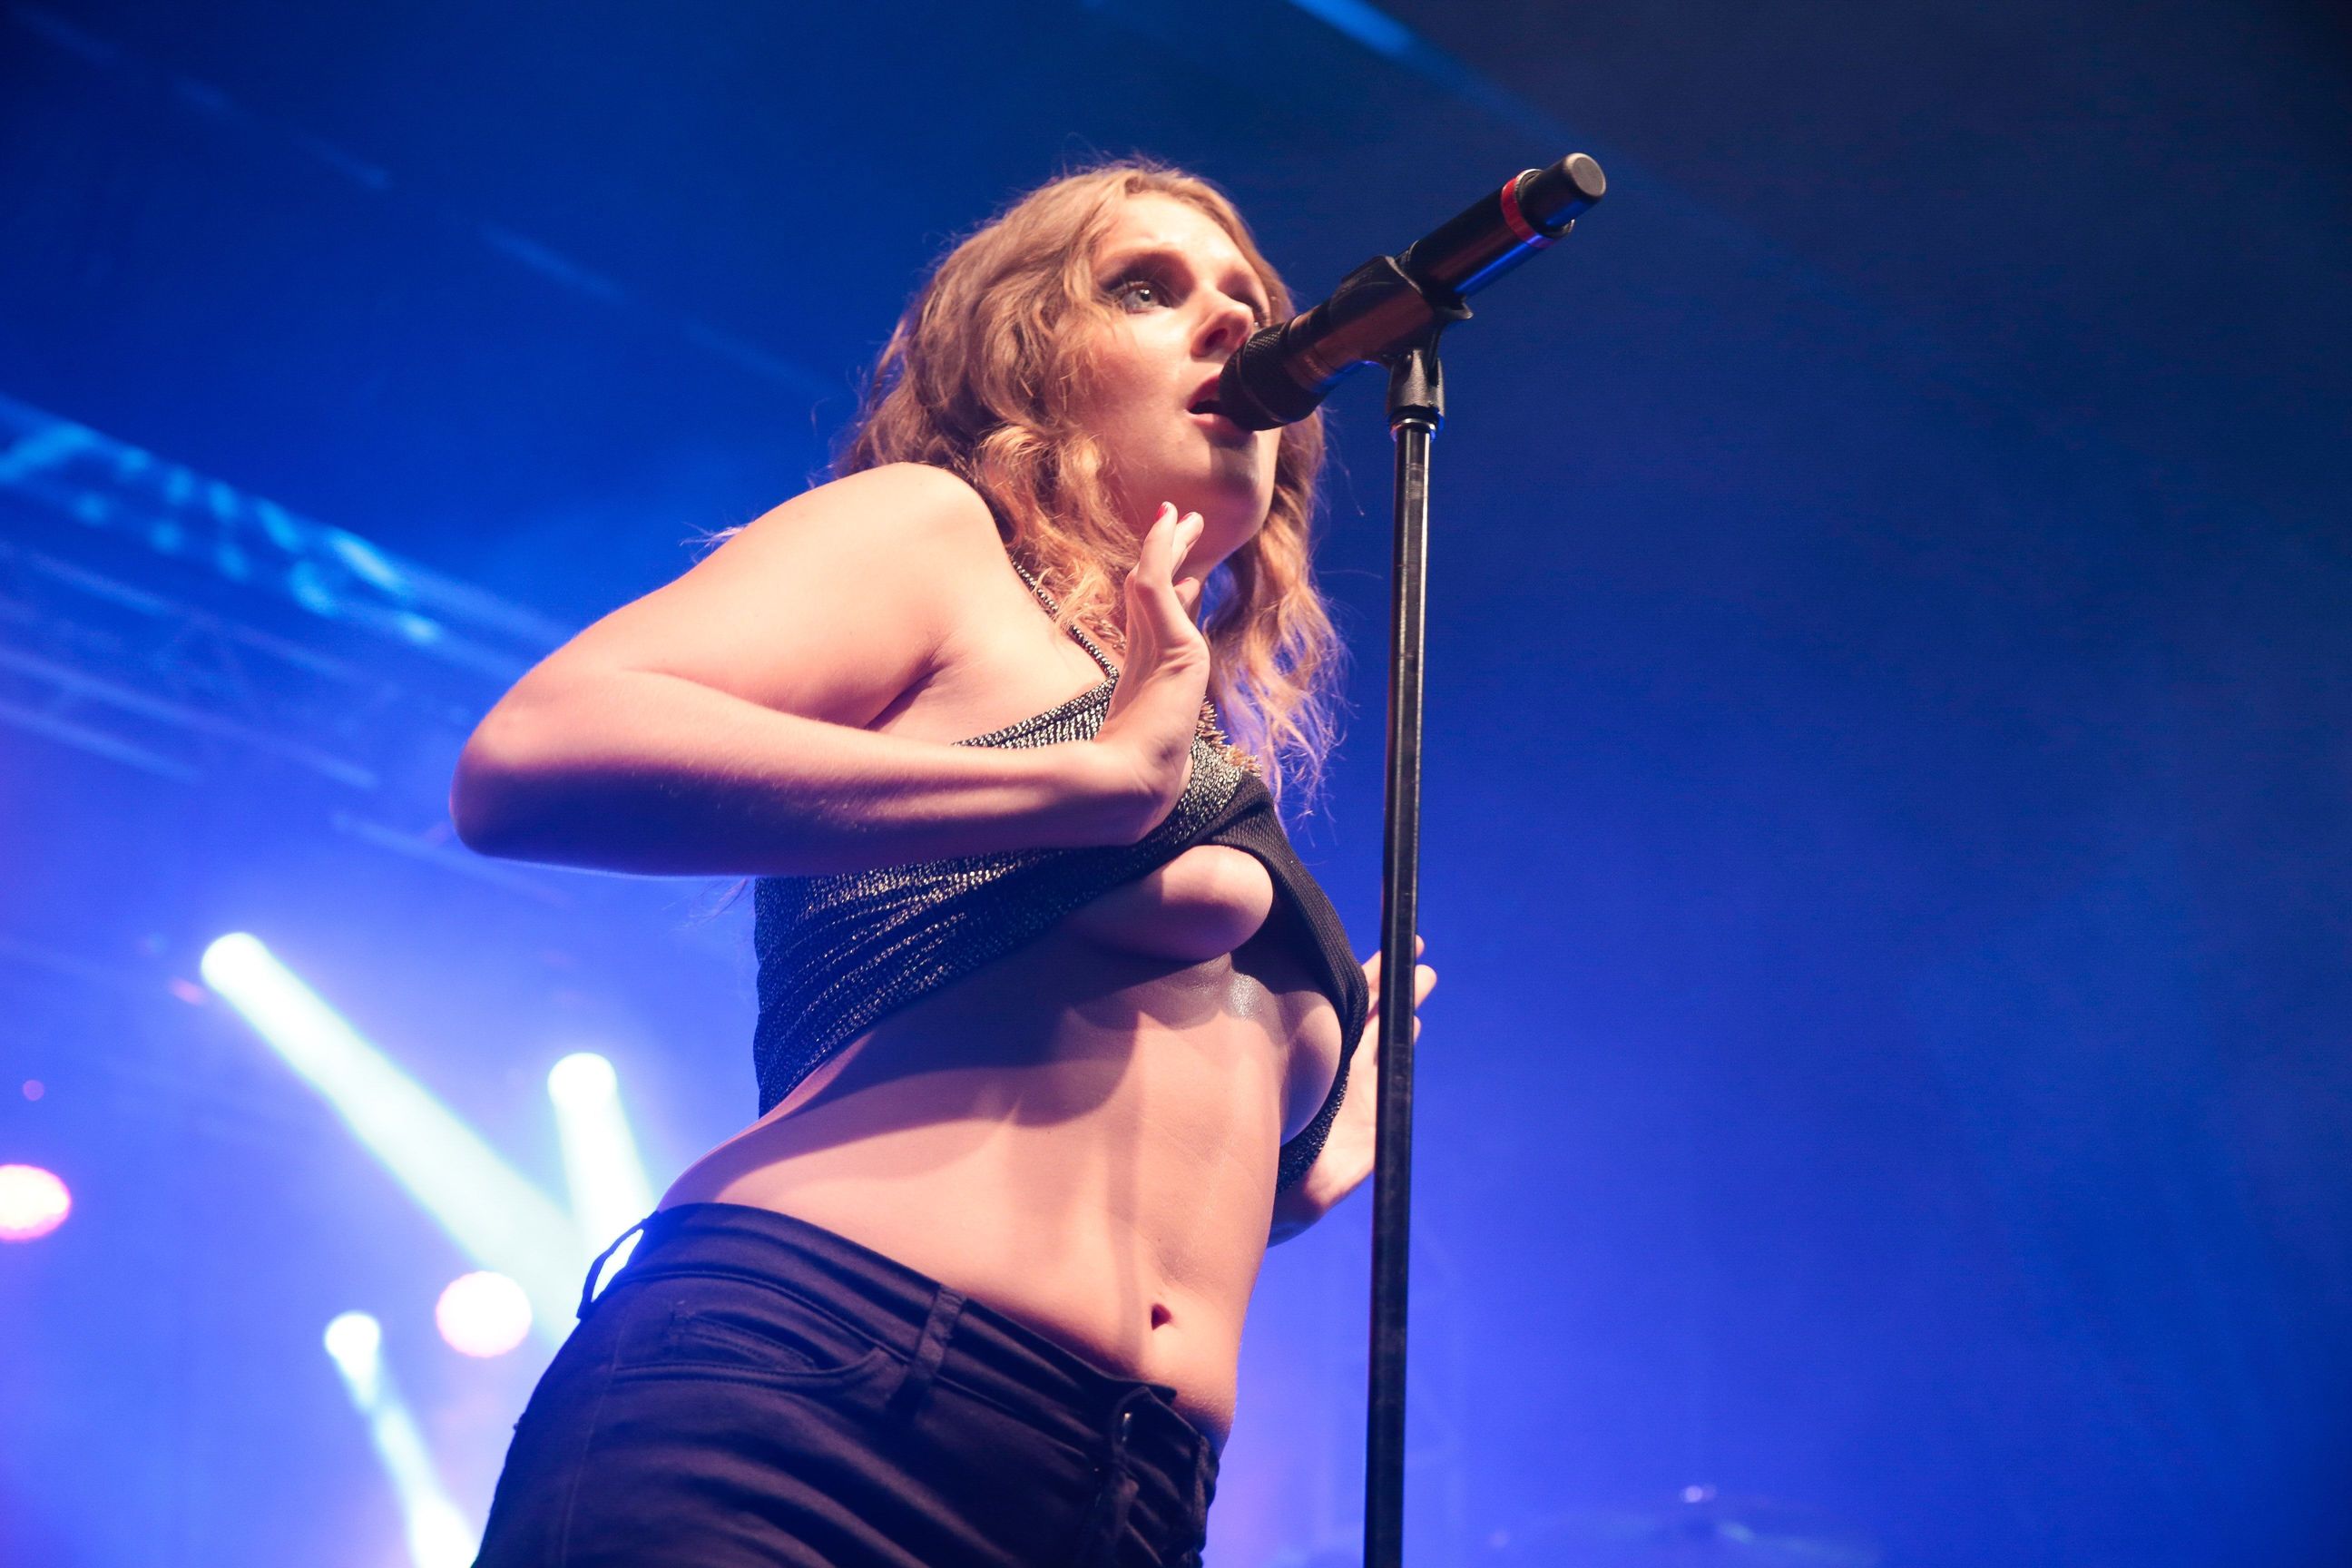 Tove sexy concert lo leaked live topless video and Affiliate Members